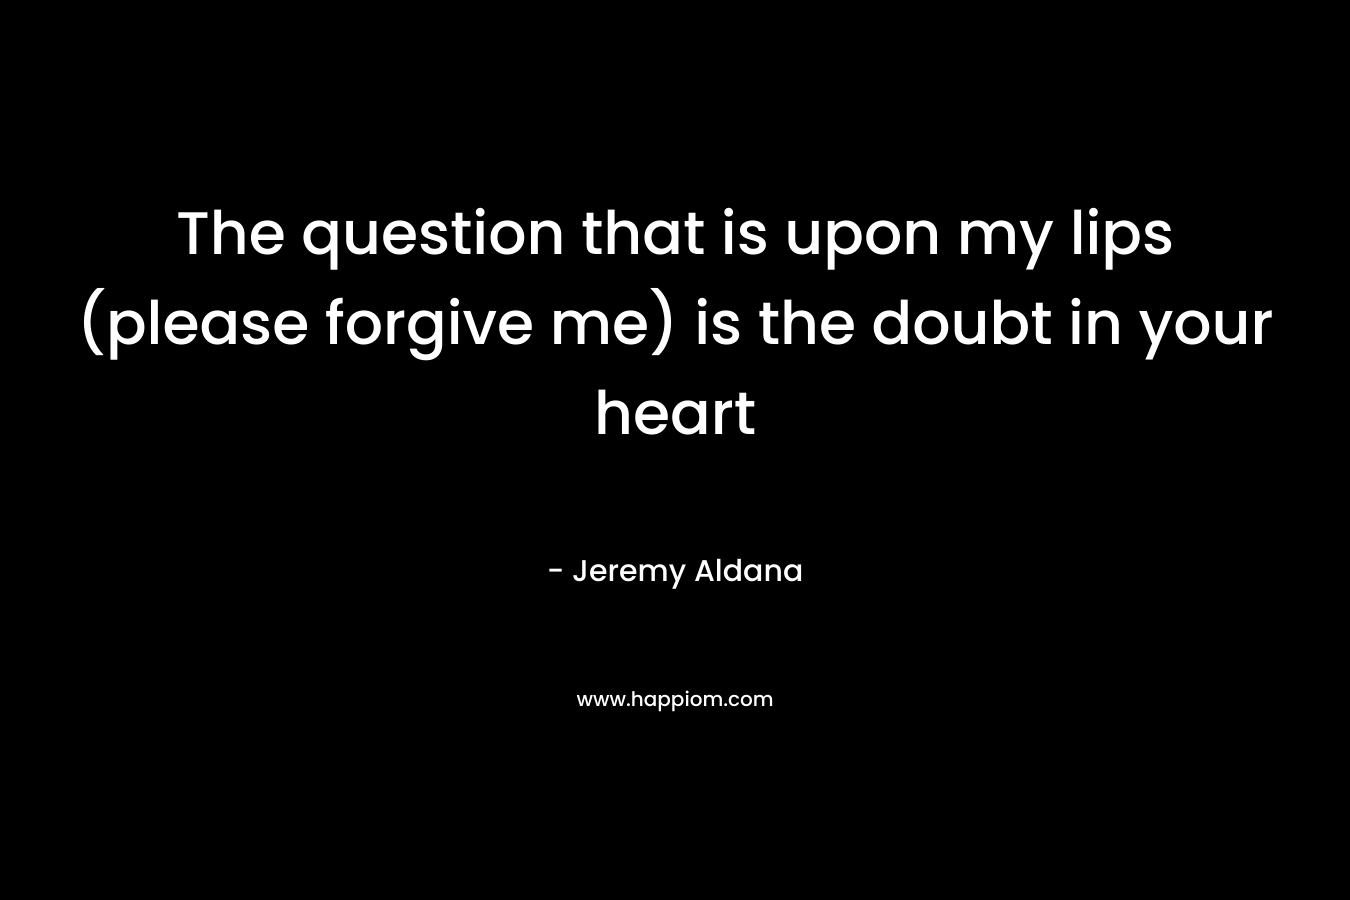 The question that is upon my lips (please forgive me) is the doubt in your heart – Jeremy Aldana